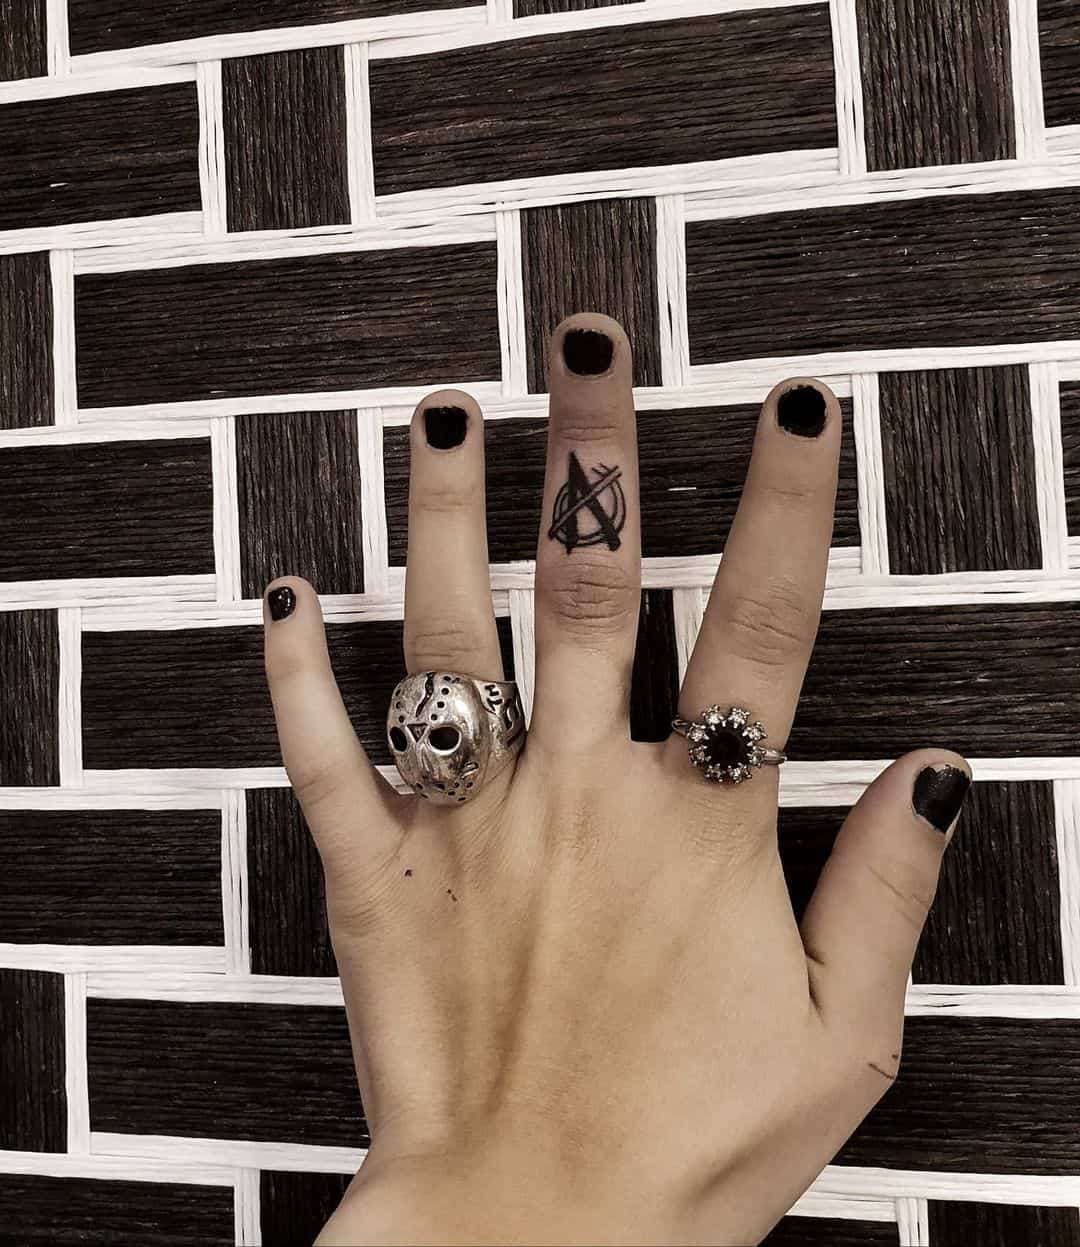 Anarchy tattoo on middle finger